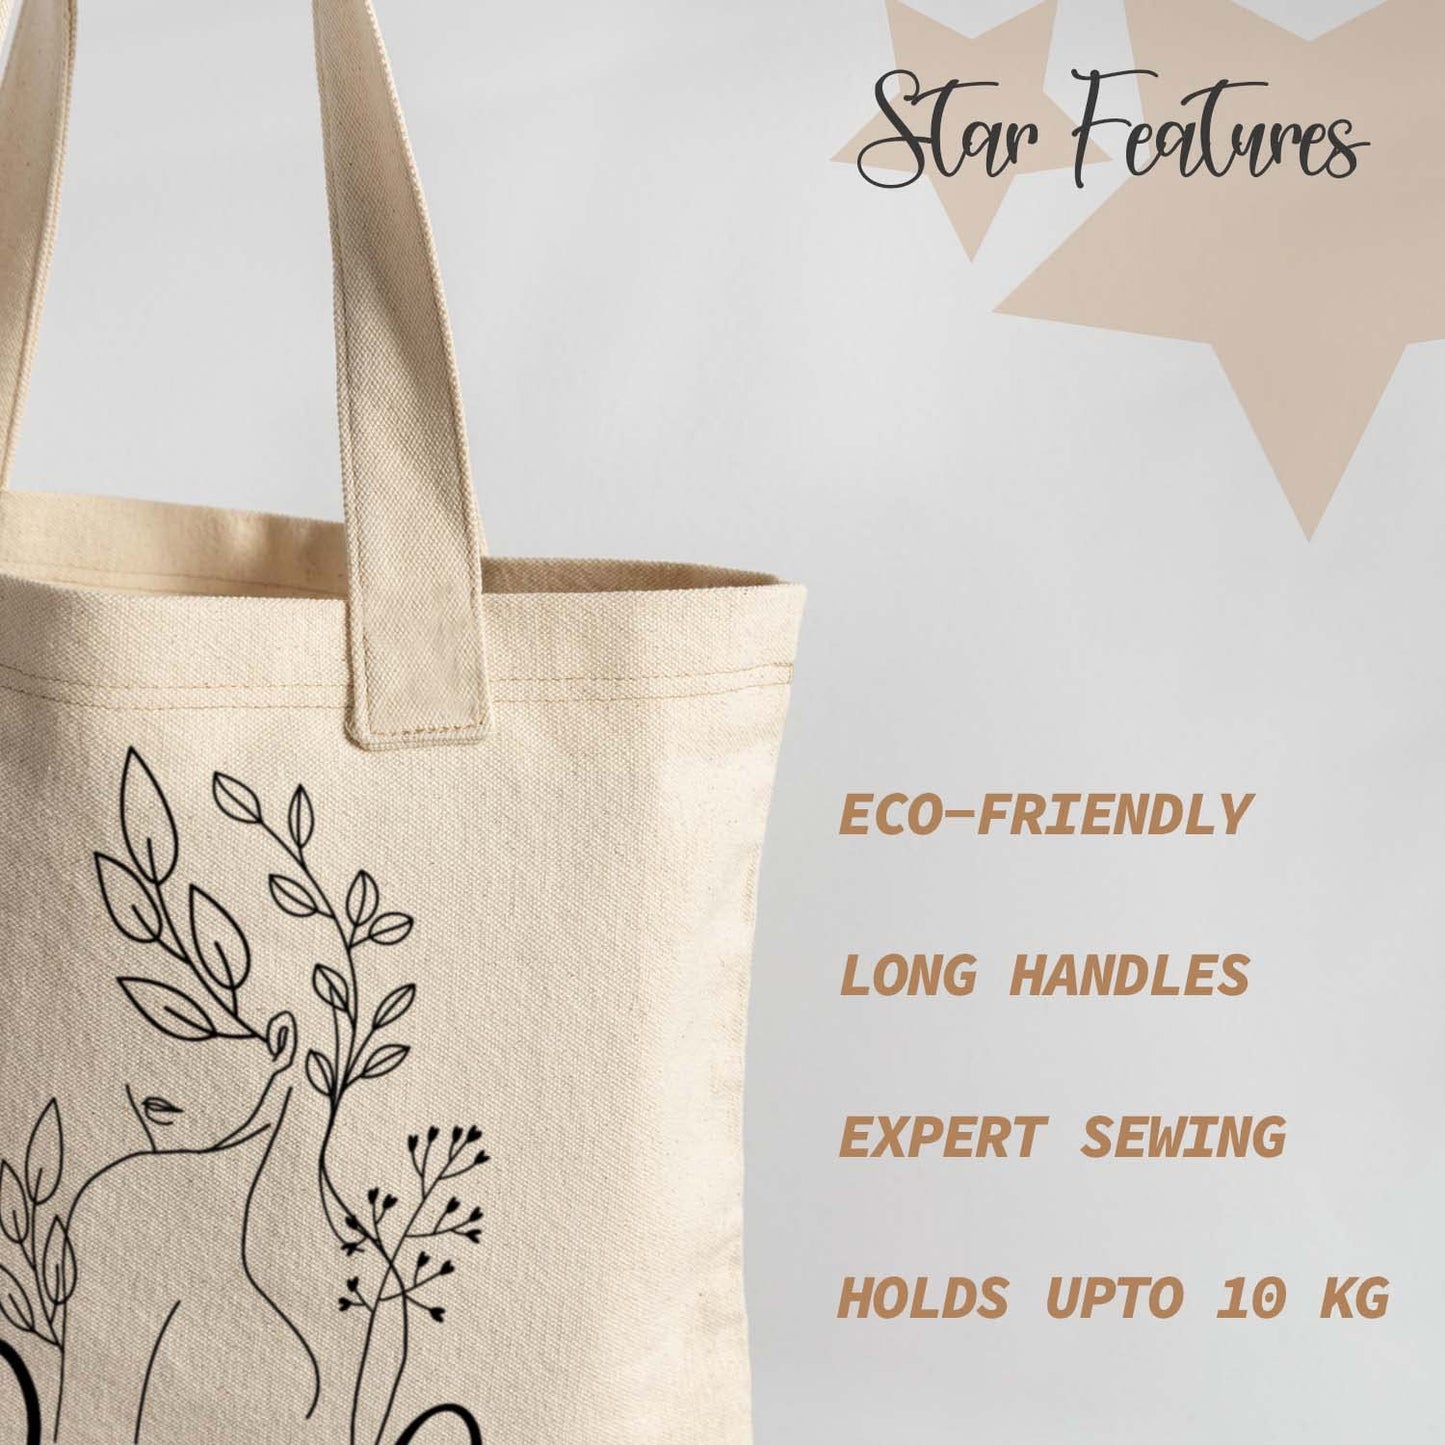 Bags & Totes